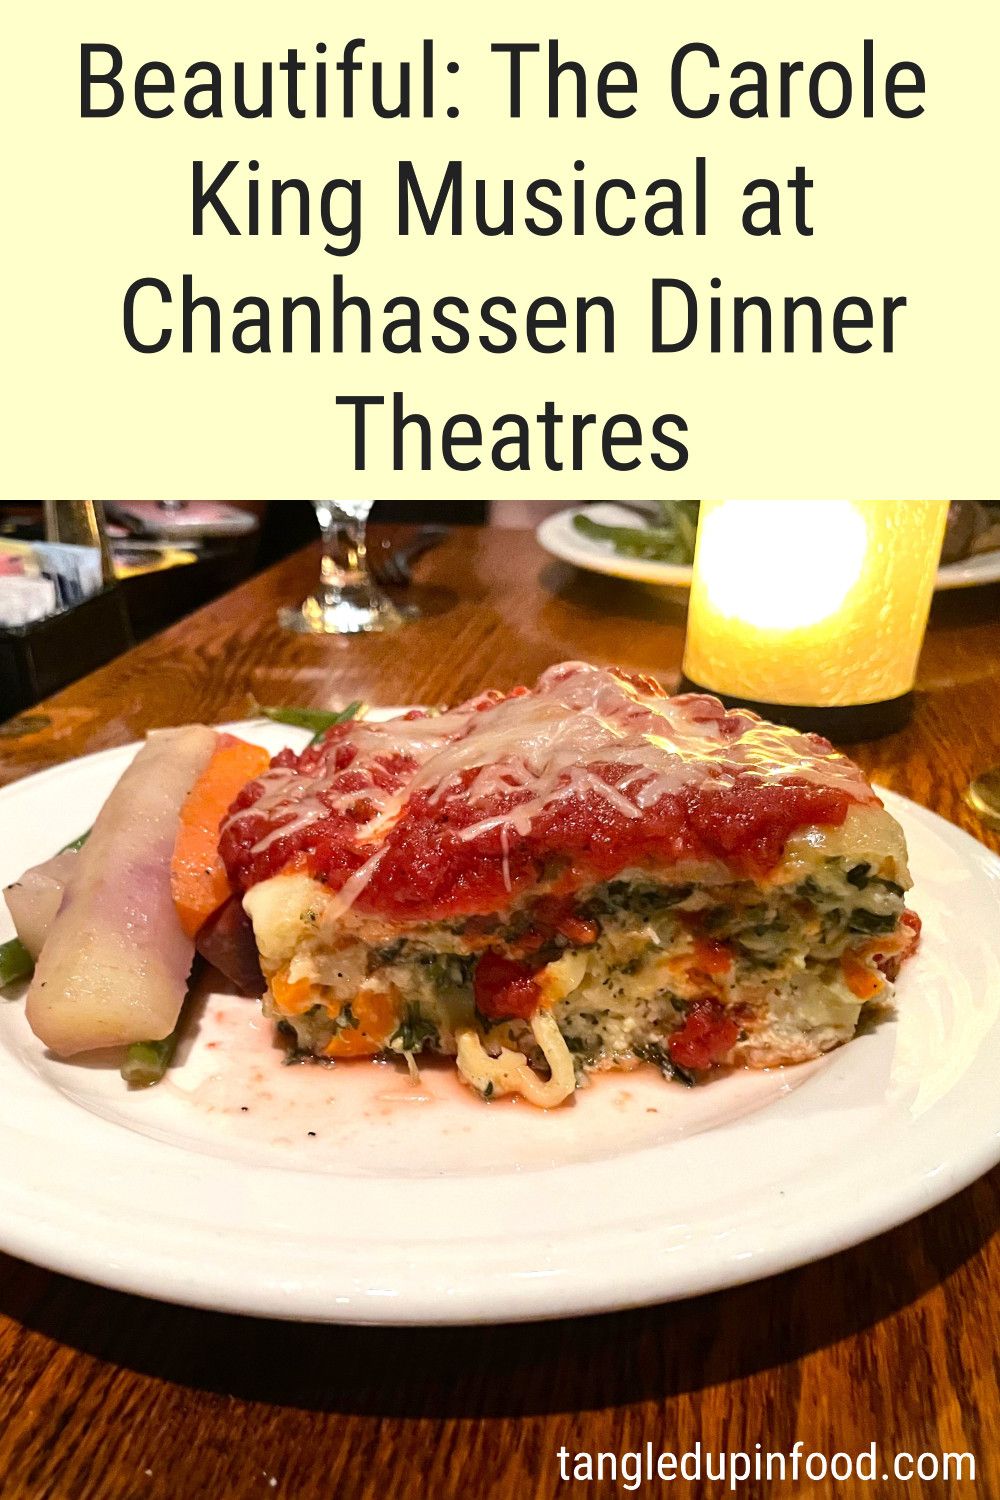 Photo of vegetable lasagna with text reading "Beautiful: The Carole King Musical at Chanhassen Dinner Theatres" 